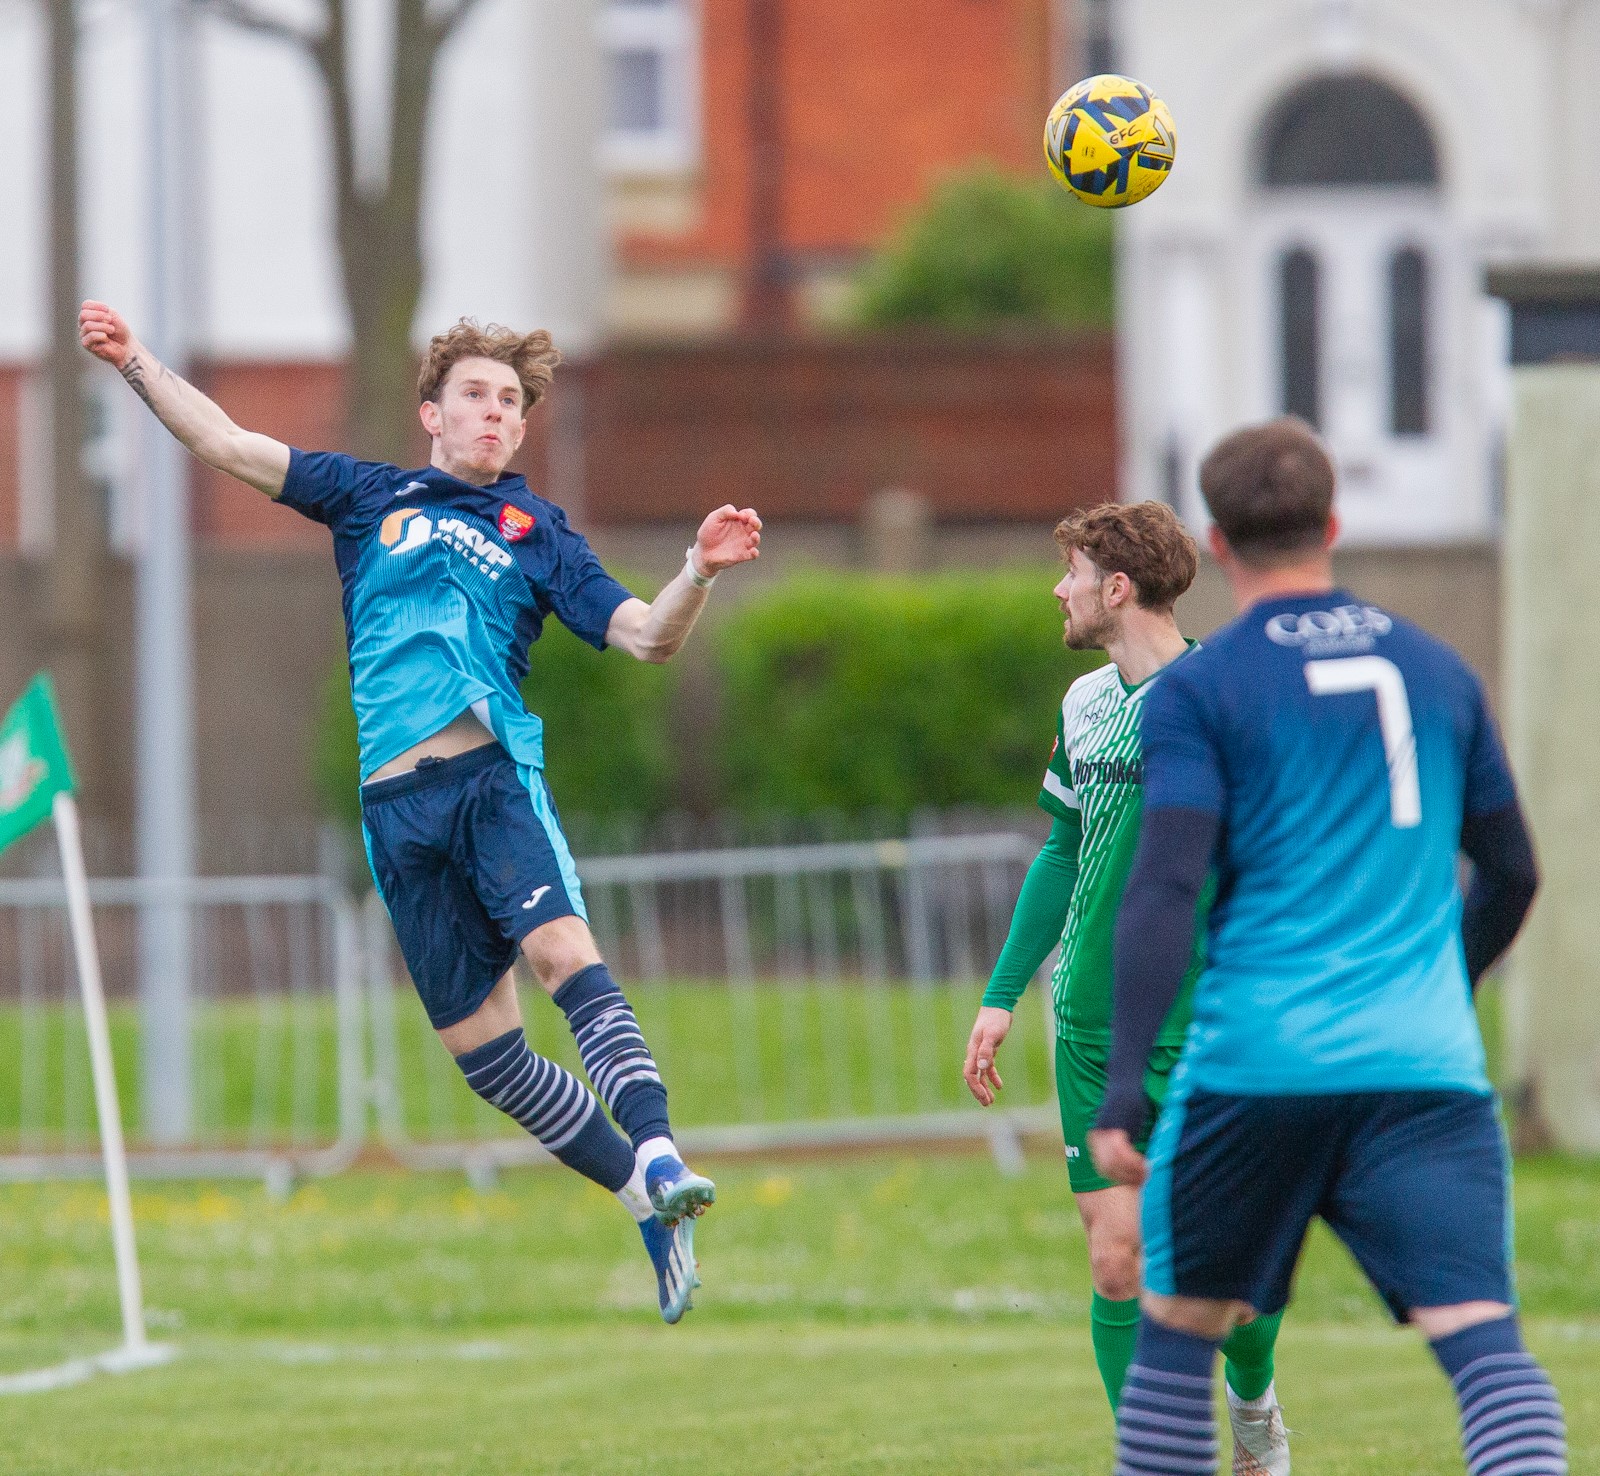 Felixstowe's Seth O'Neill with a header in the second half. Pictures by Stefan Peck.